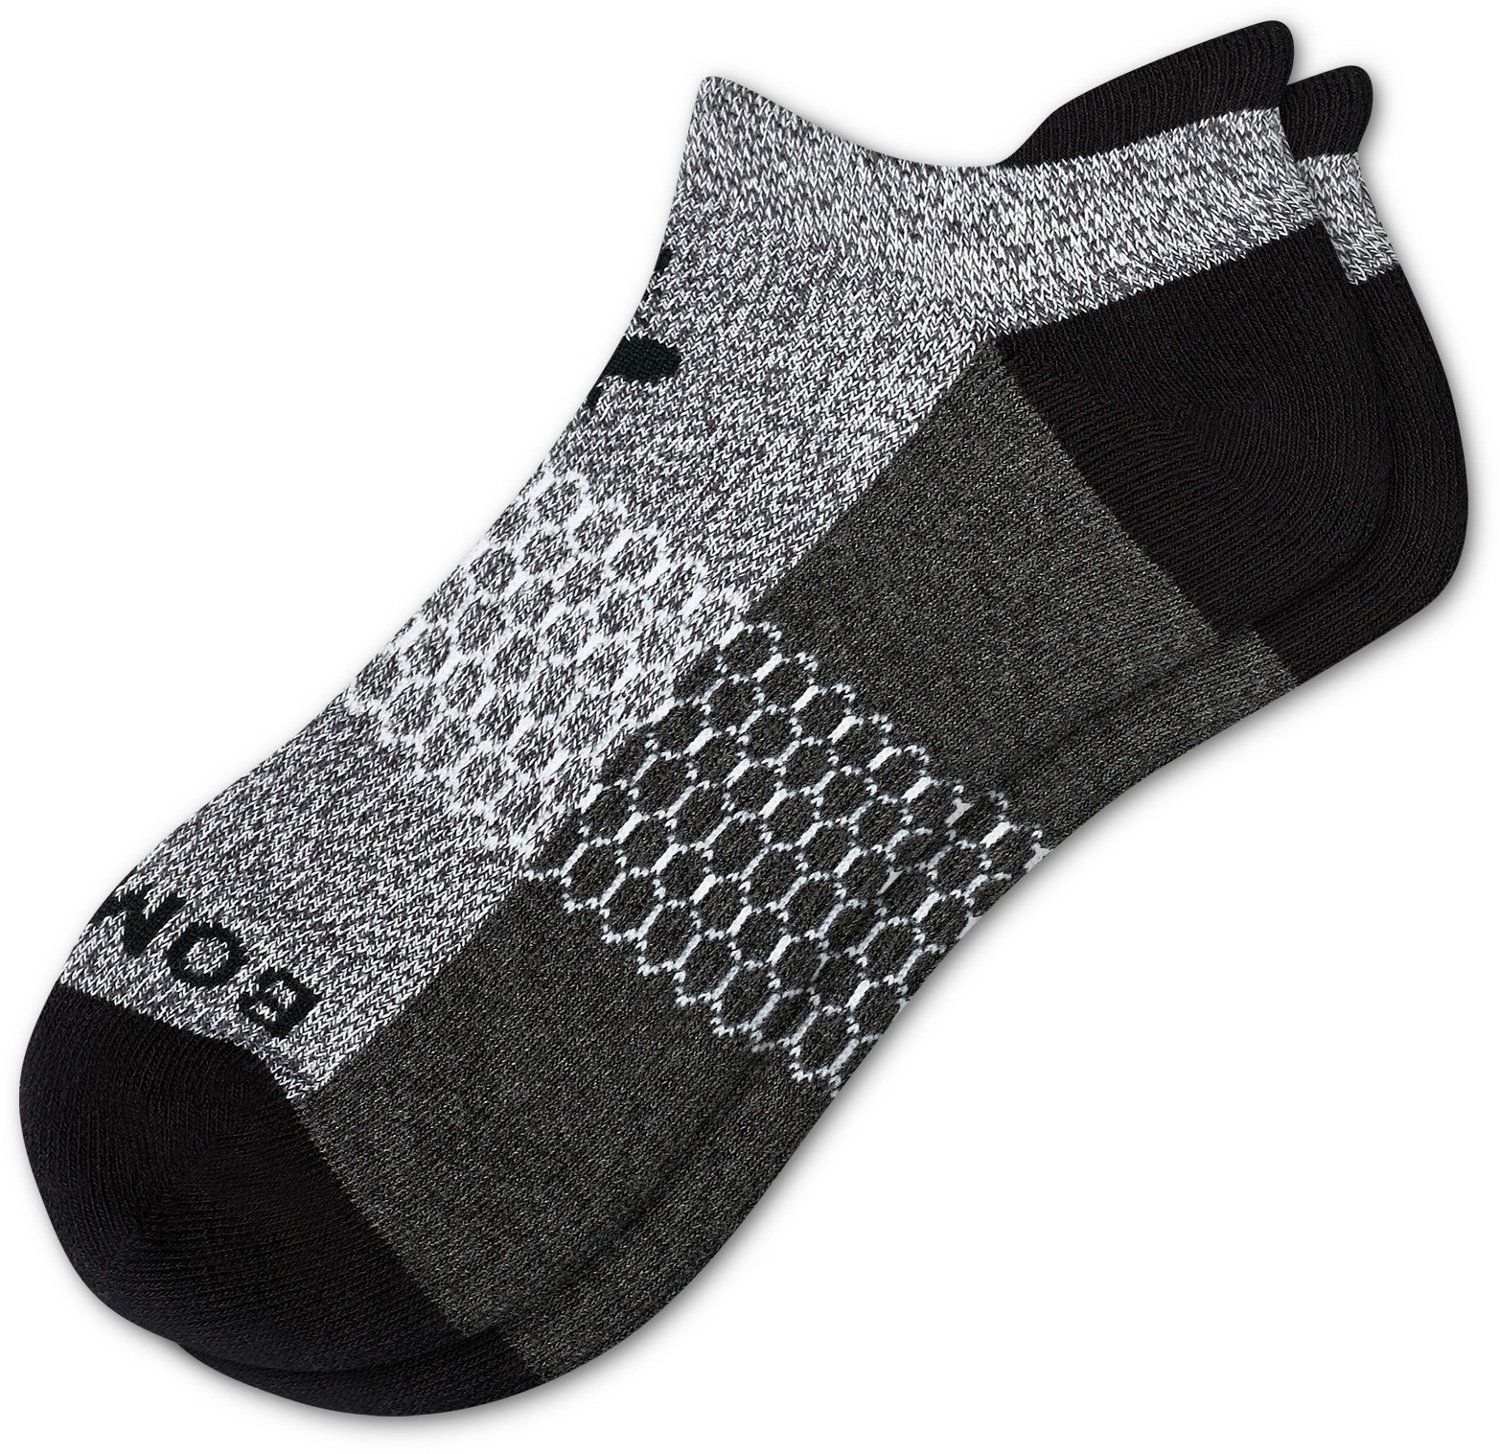 Bombas Original Ankle Socks                                                                                                      - view number 1 selected